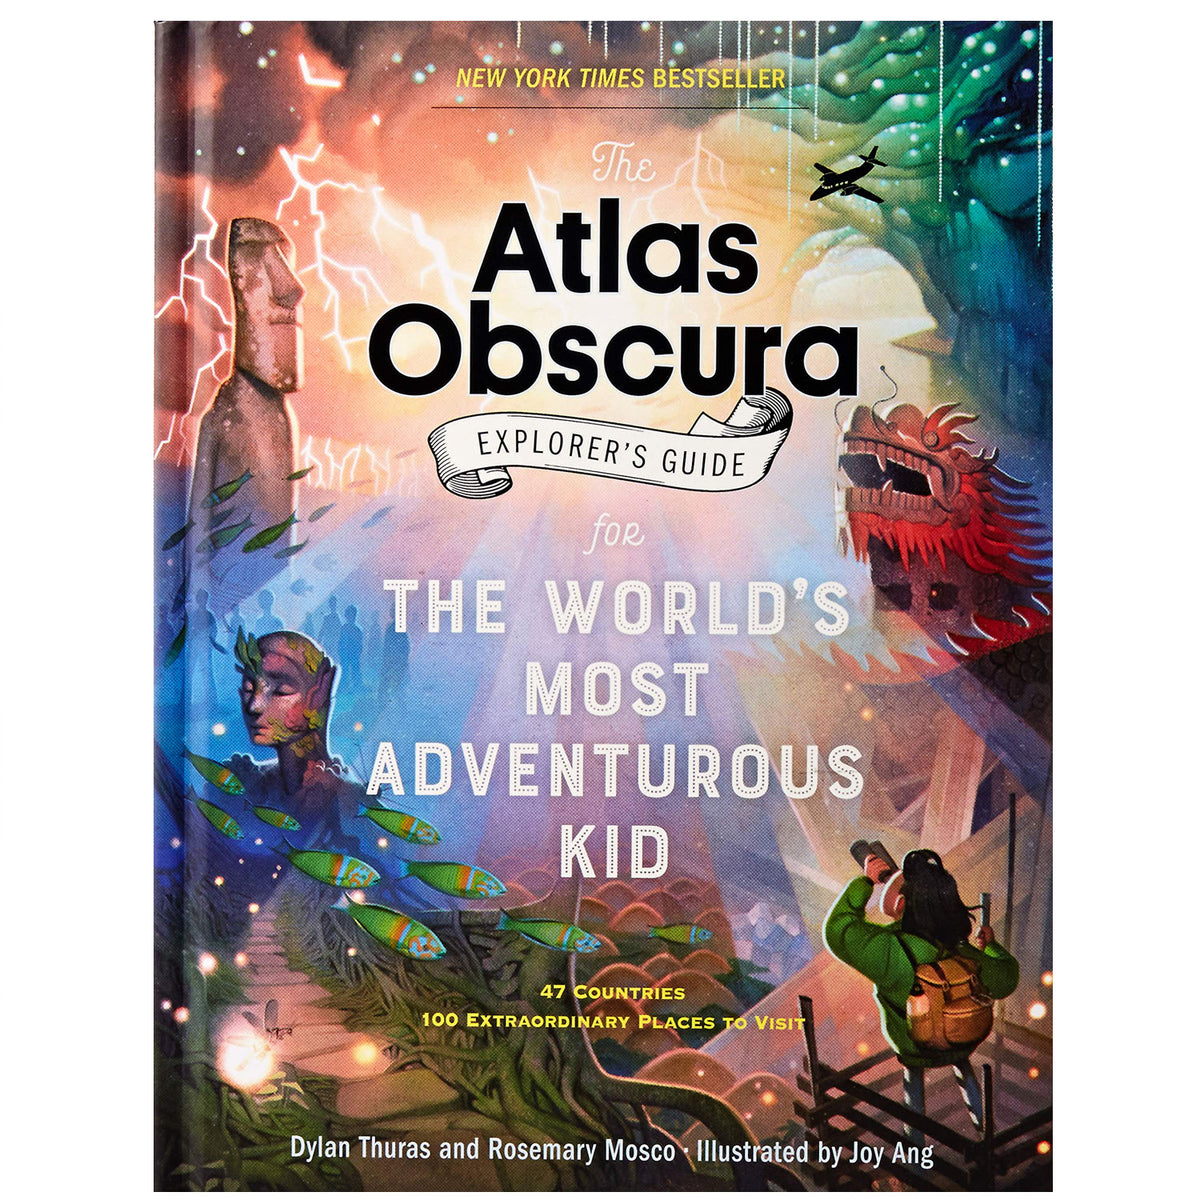 A Newbies Guide to Atlas of Worlds